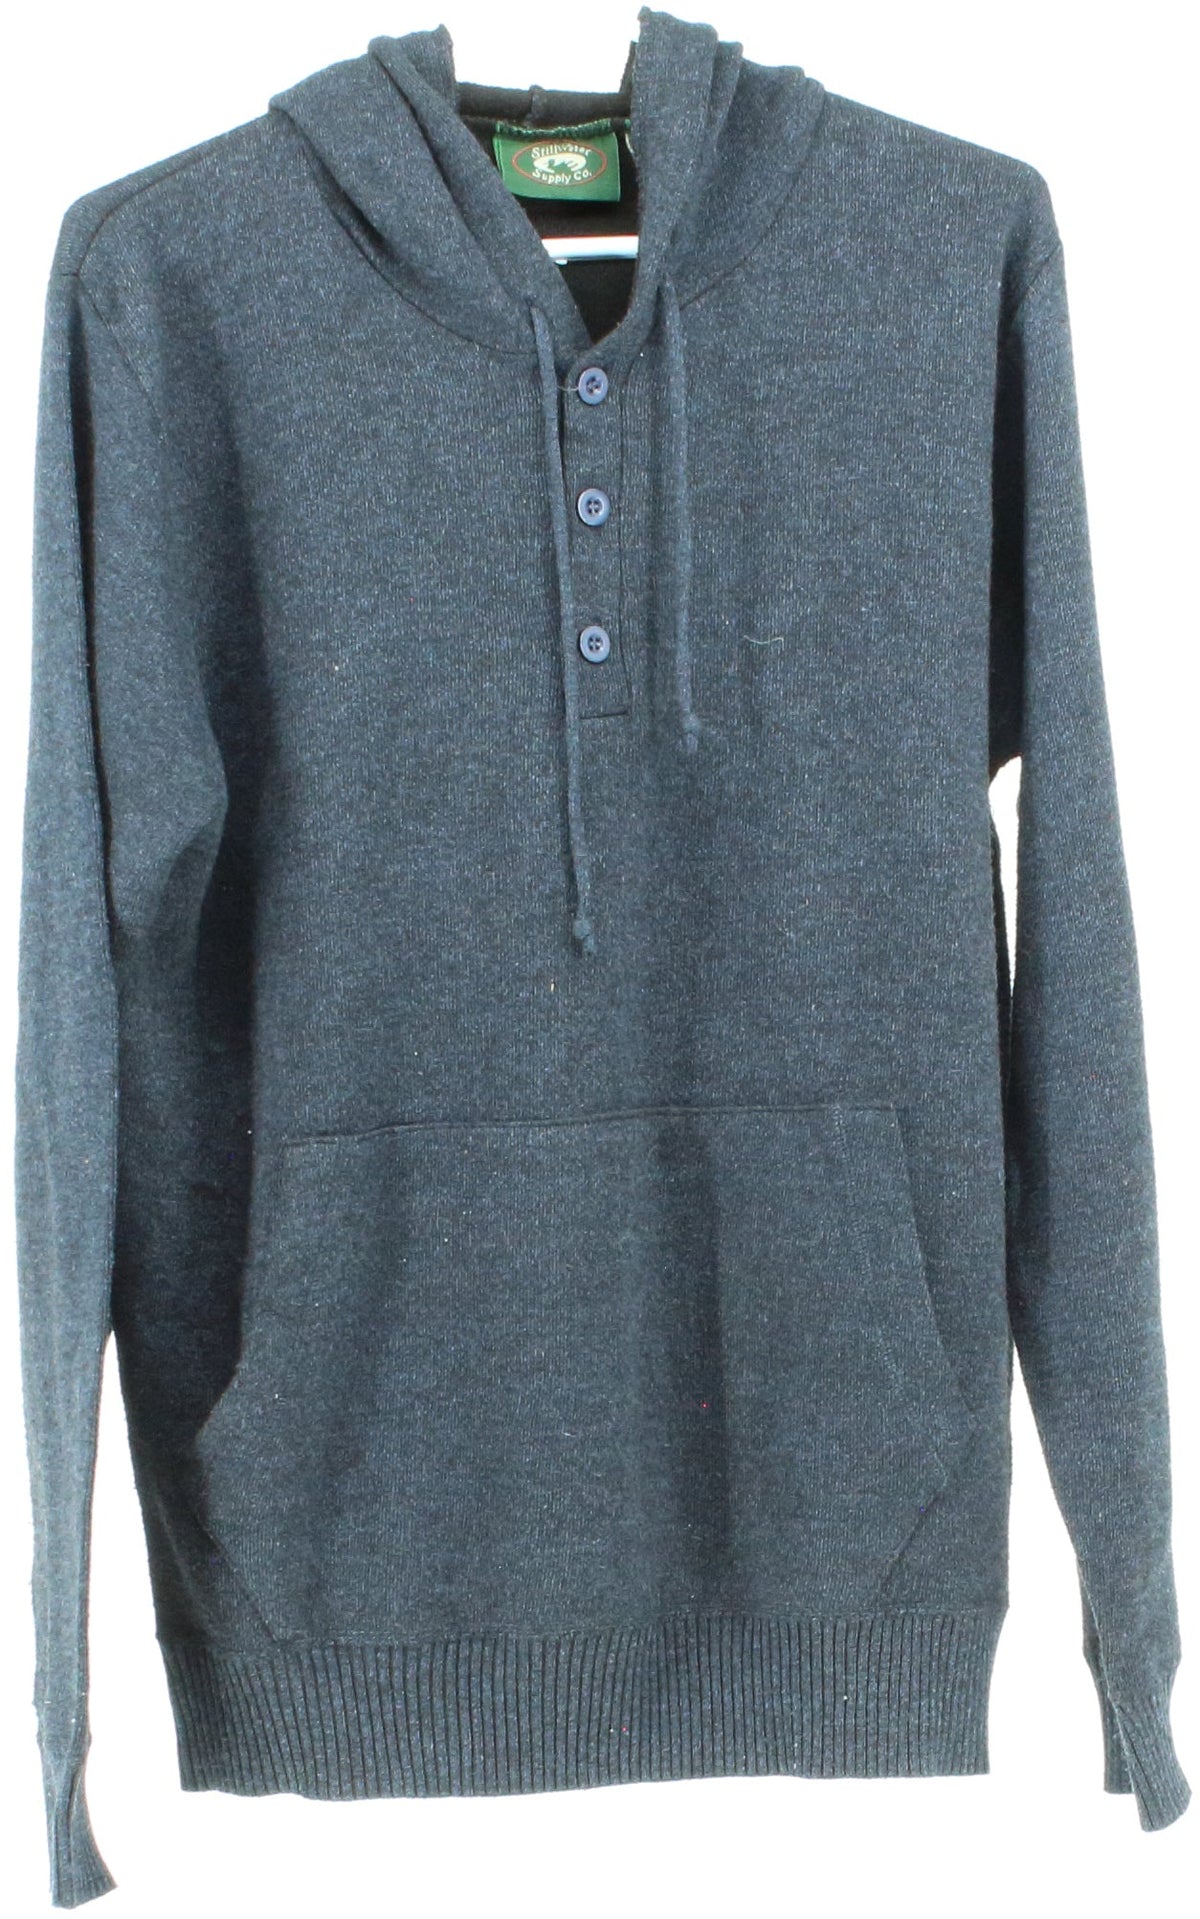 Stillwater Supply Co. Navy Blue Hooded Front Buttons Men's Sweater